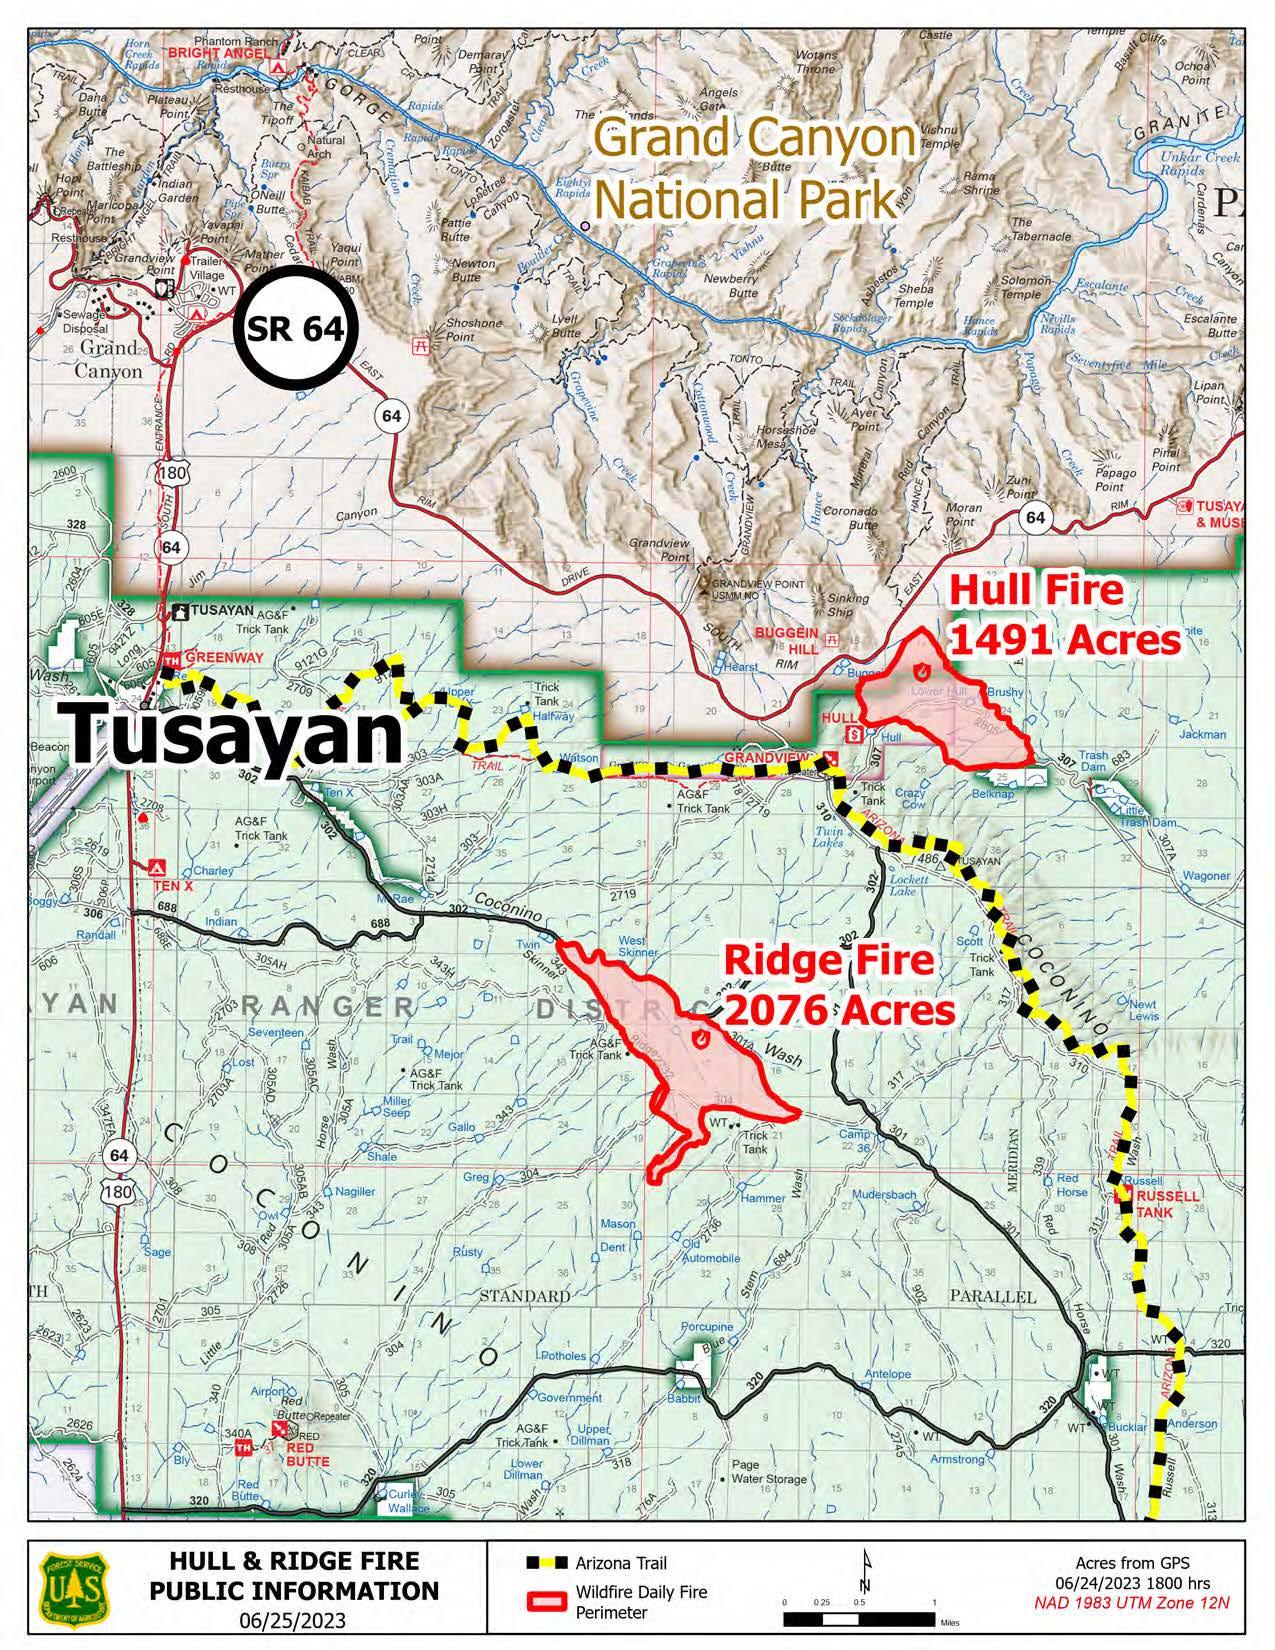 Map displaying the locations of the Hull Fire and Ridge Fire in relation to the town of Tusayan, Arizona.